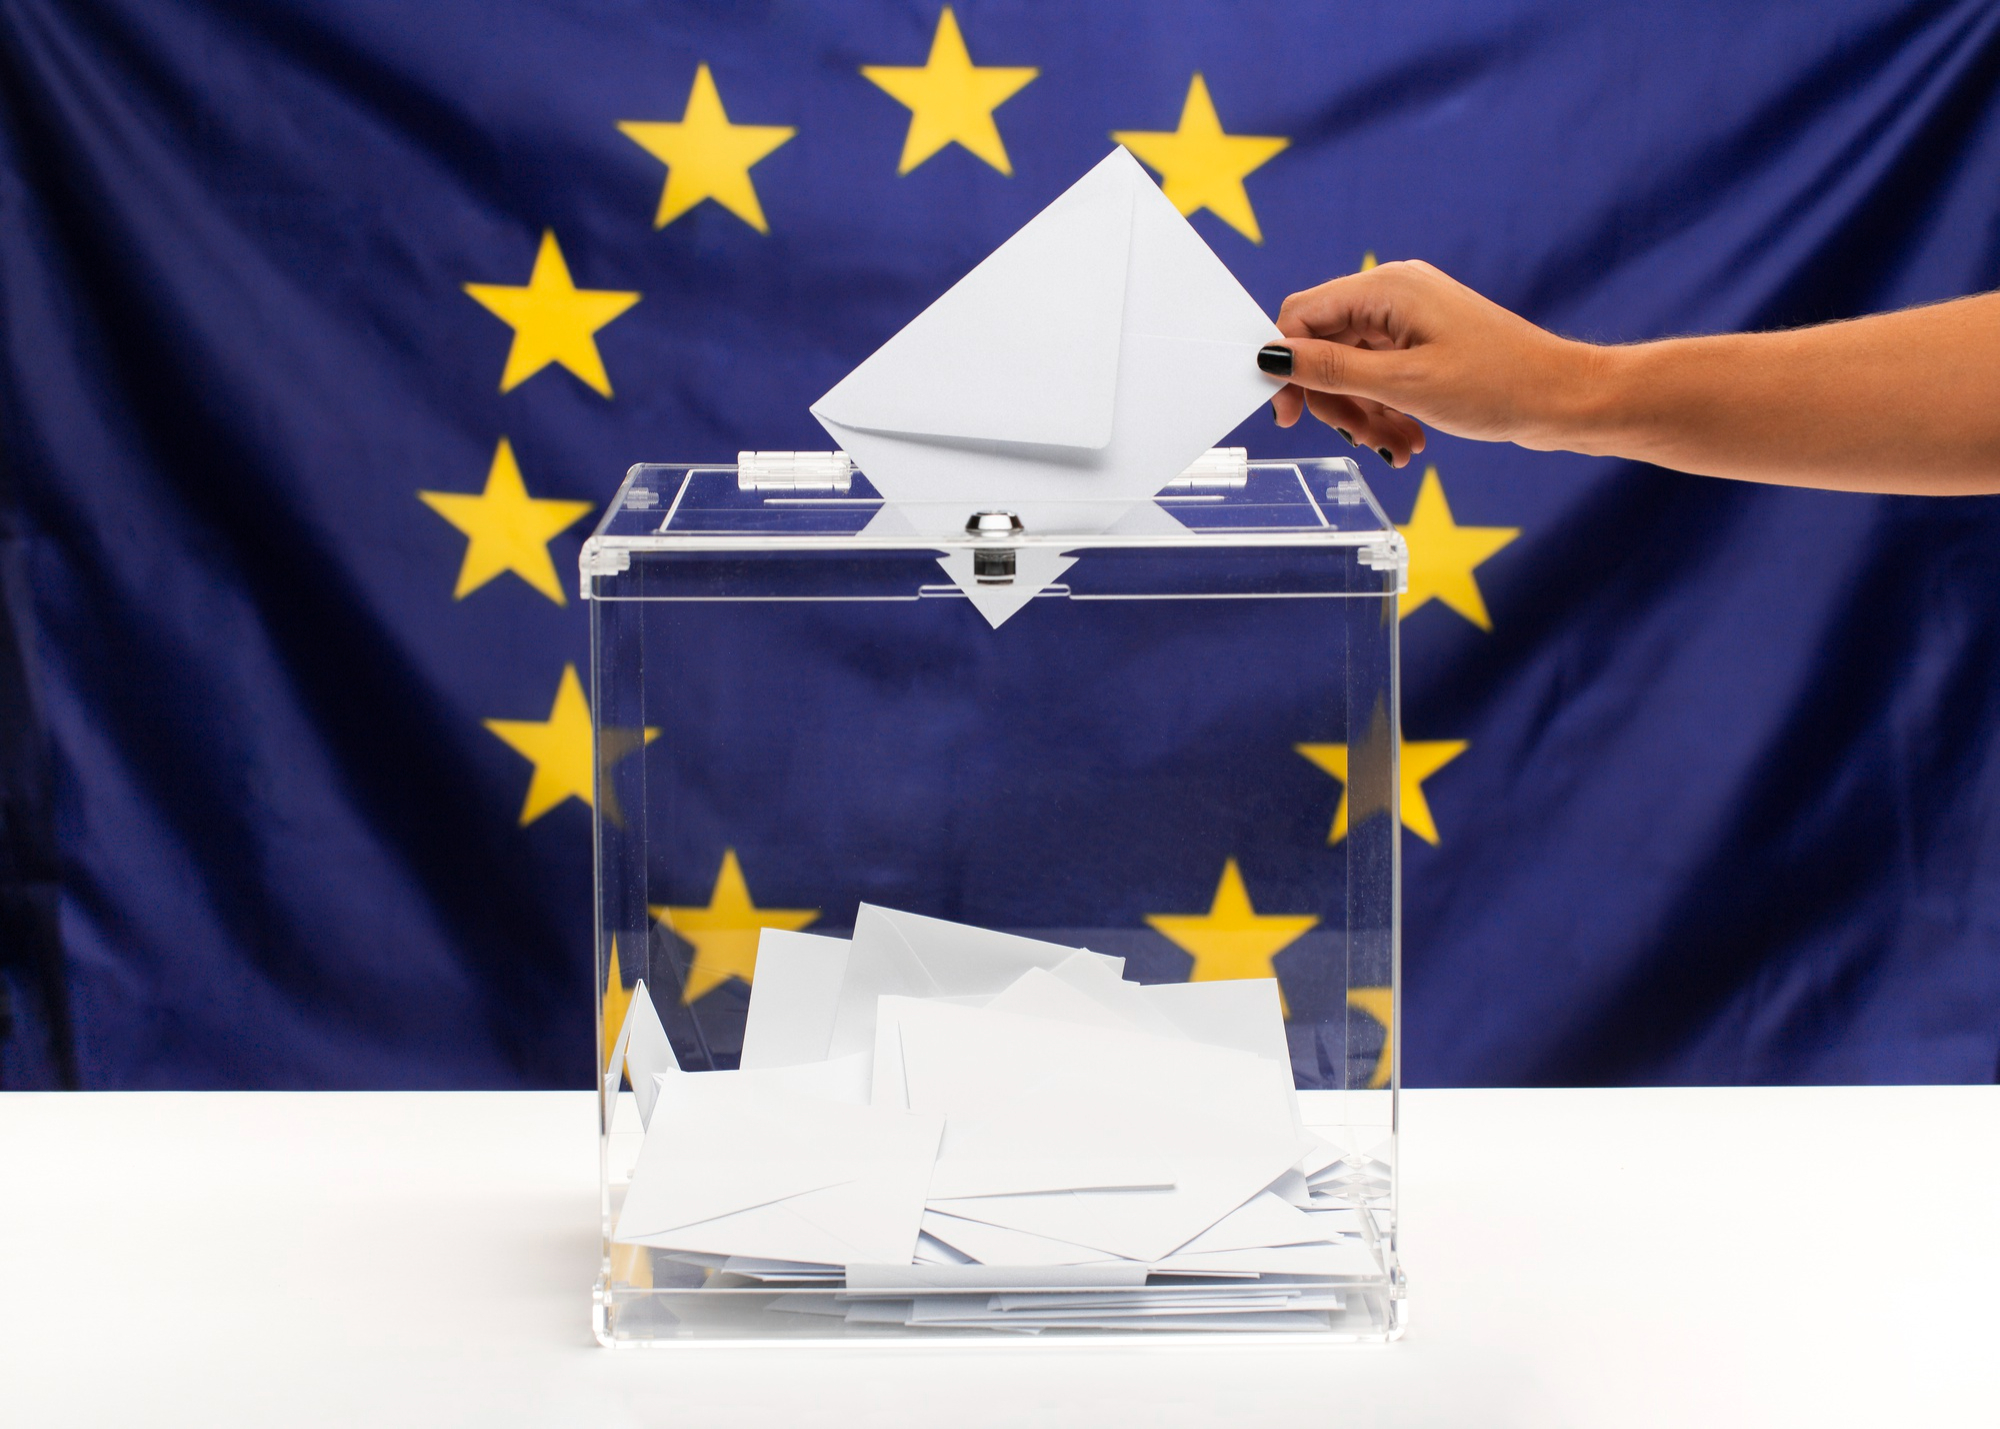 ‘Don’t lose your ambition on society and sustainability’ – Euro elections plea from impact community leaders